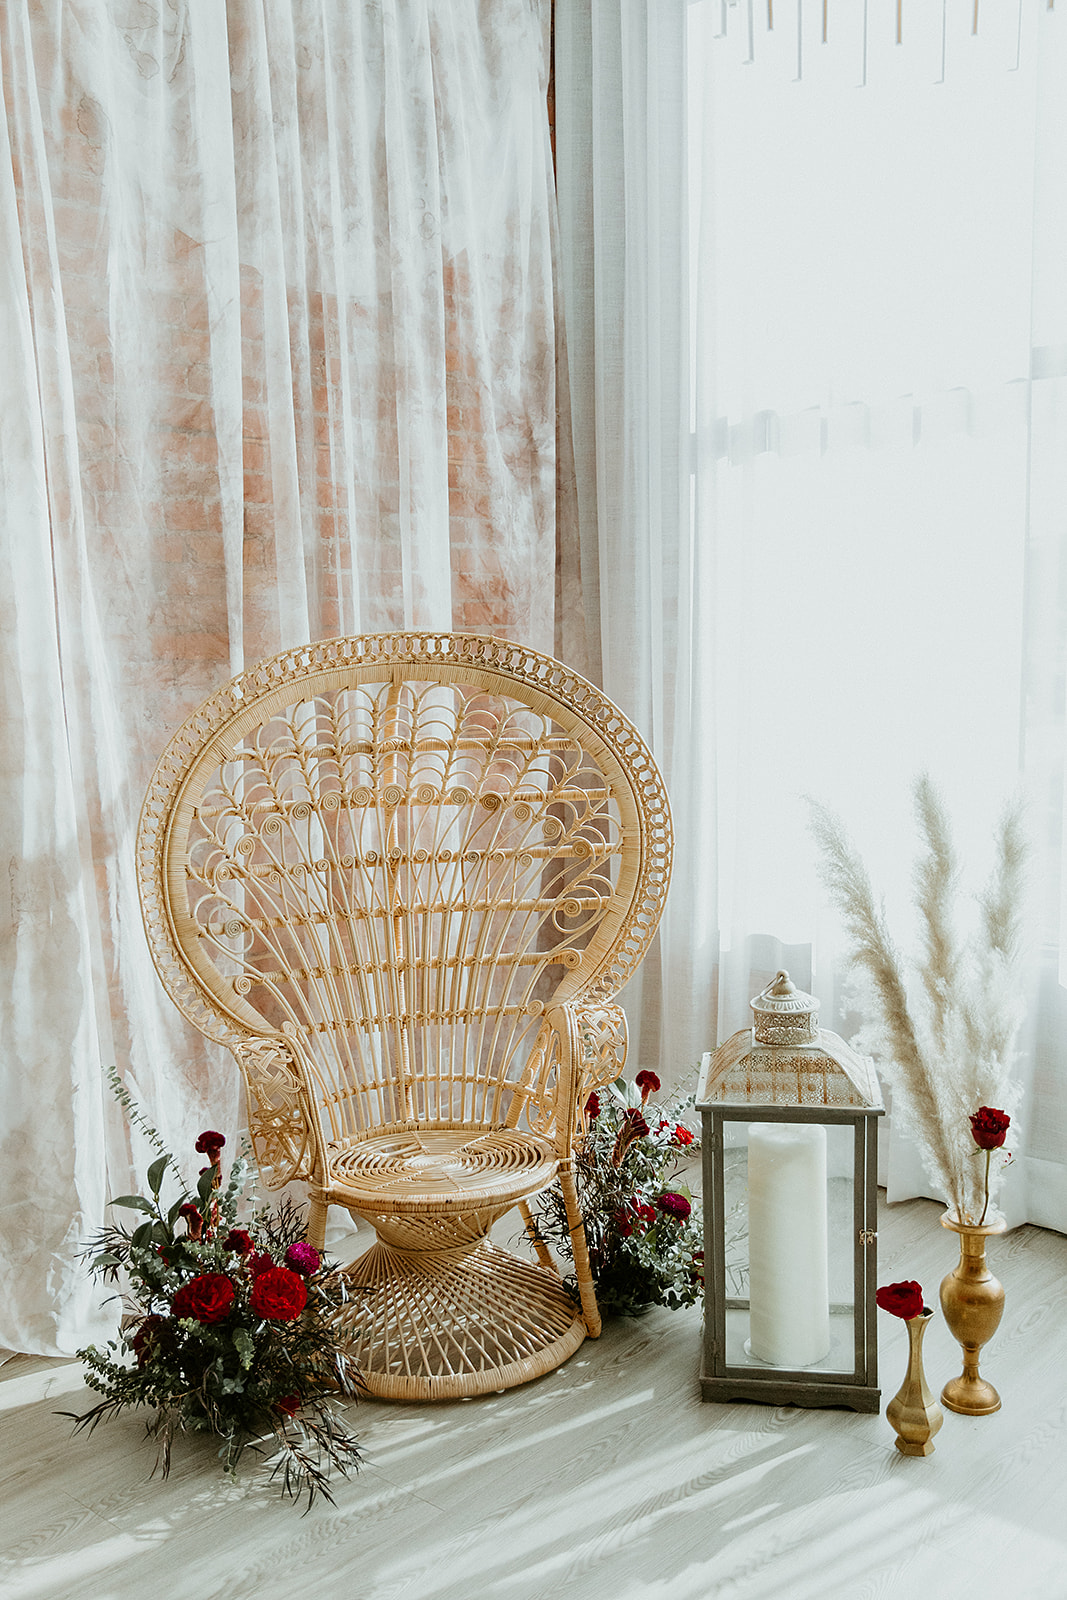 Indian and Moroccan inspired wedding ceremony decor with an ornate rattan chair and wild pampas grass